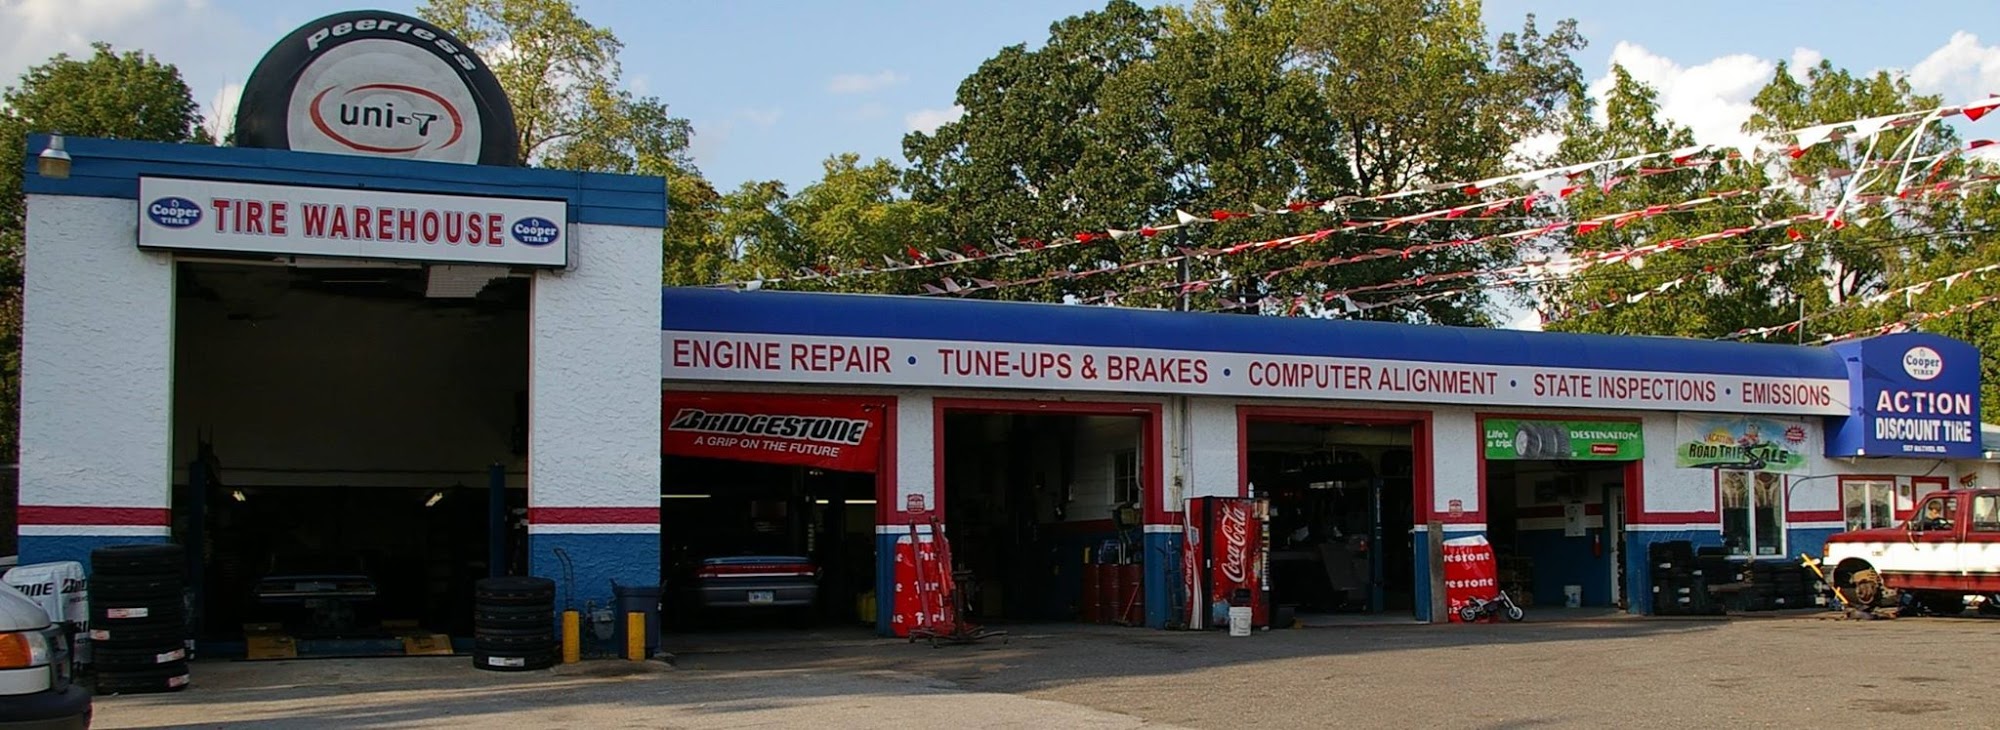 Action Discount Tire